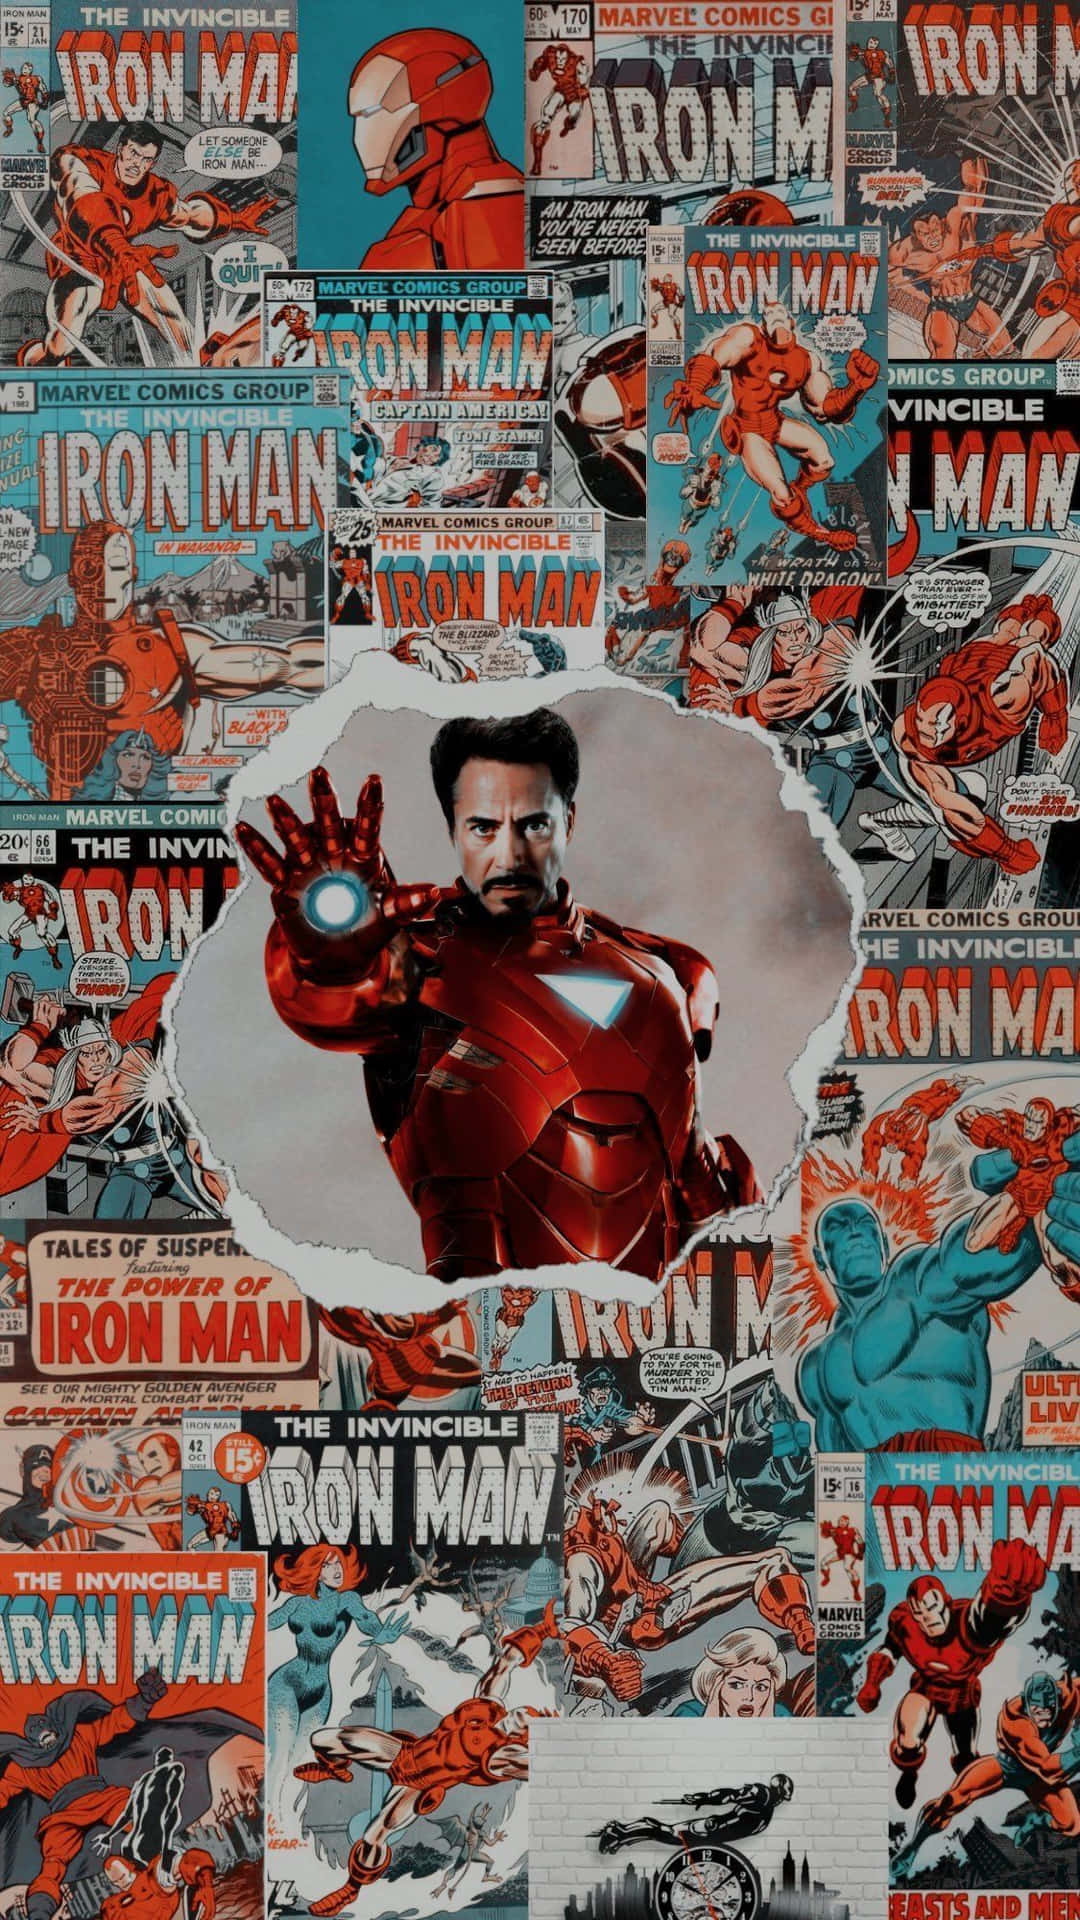 Iron Man showered in streams of light Wallpaper